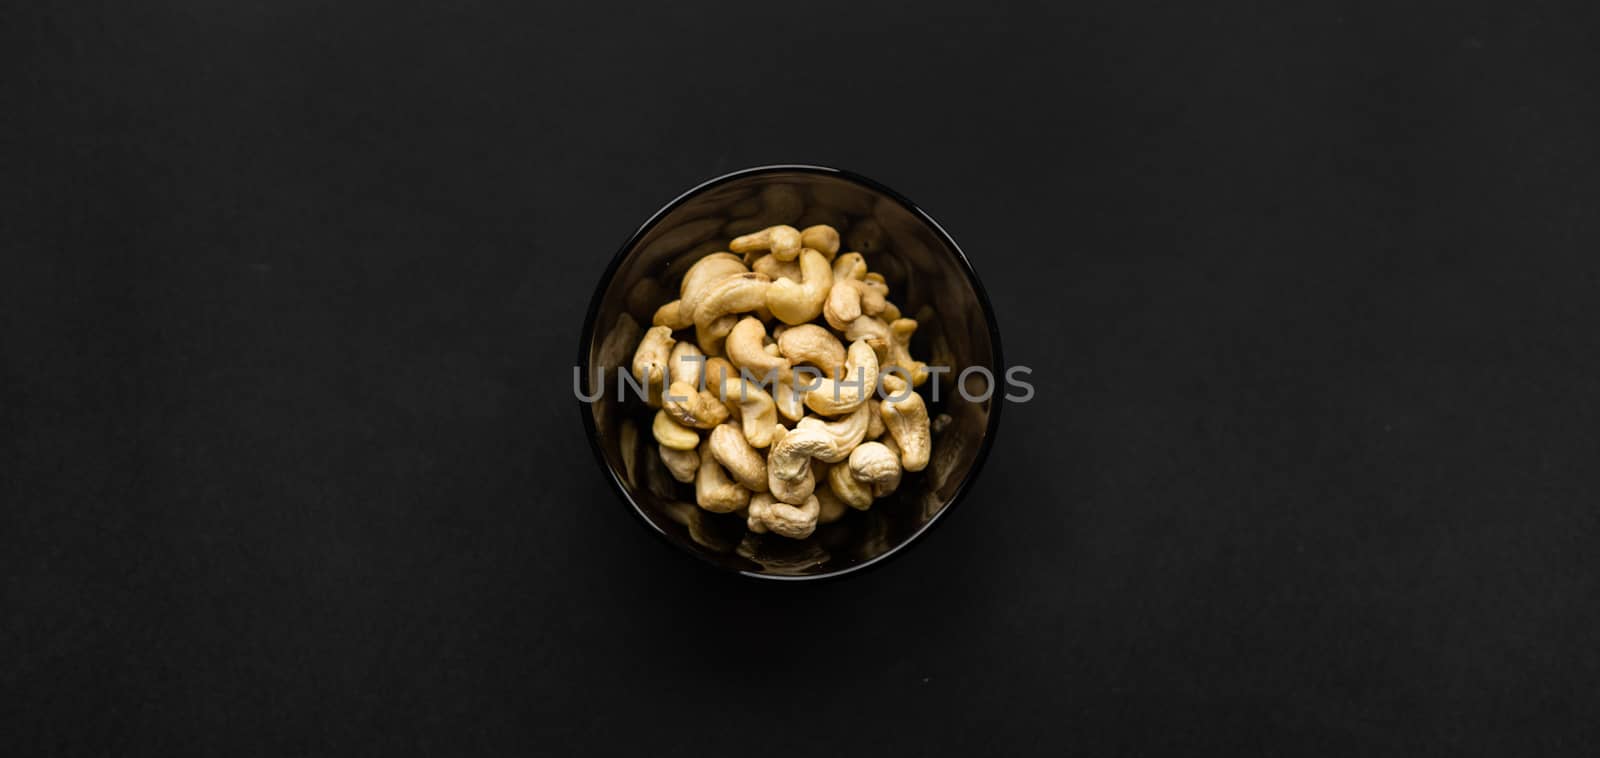 Cashew nuts in a small plate on a black table as a background. Cashew nut is a healthy vegetarian protein nutritious food. by vovsht